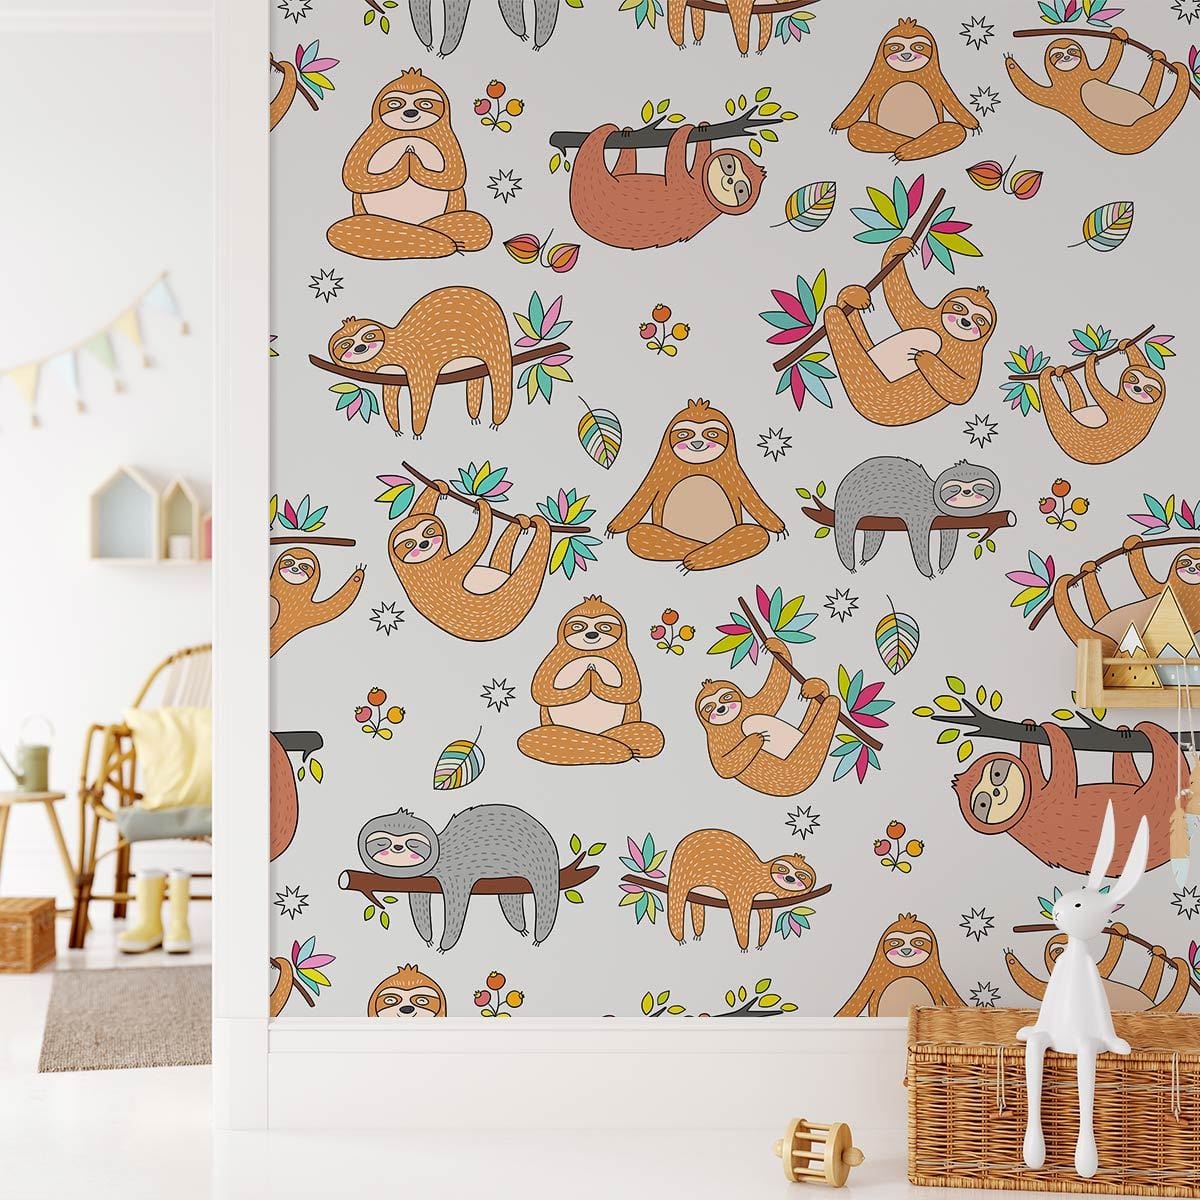 Musical Sloth Wallpaper Mural For Your Bedroom.